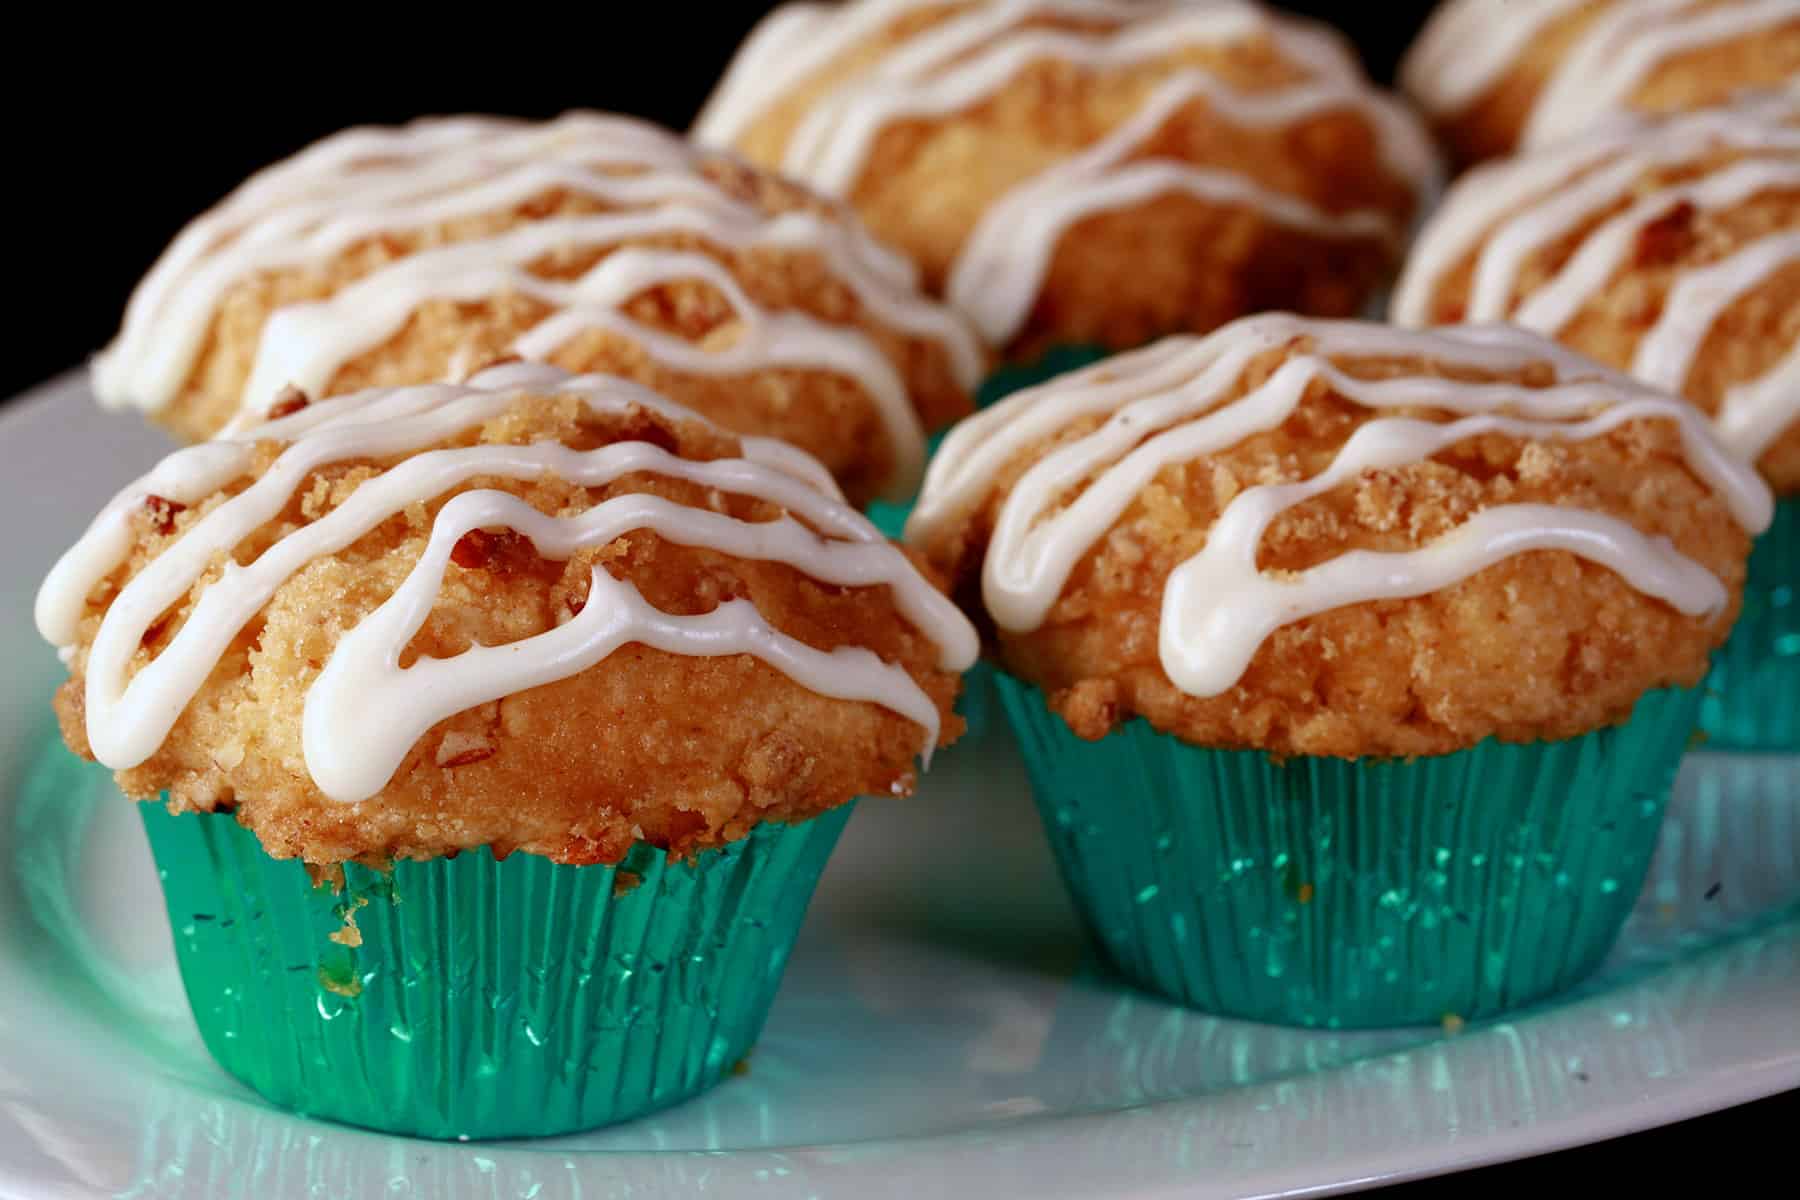 A plate of egg nog muffins, with pecan streusel and drizzled glaze.